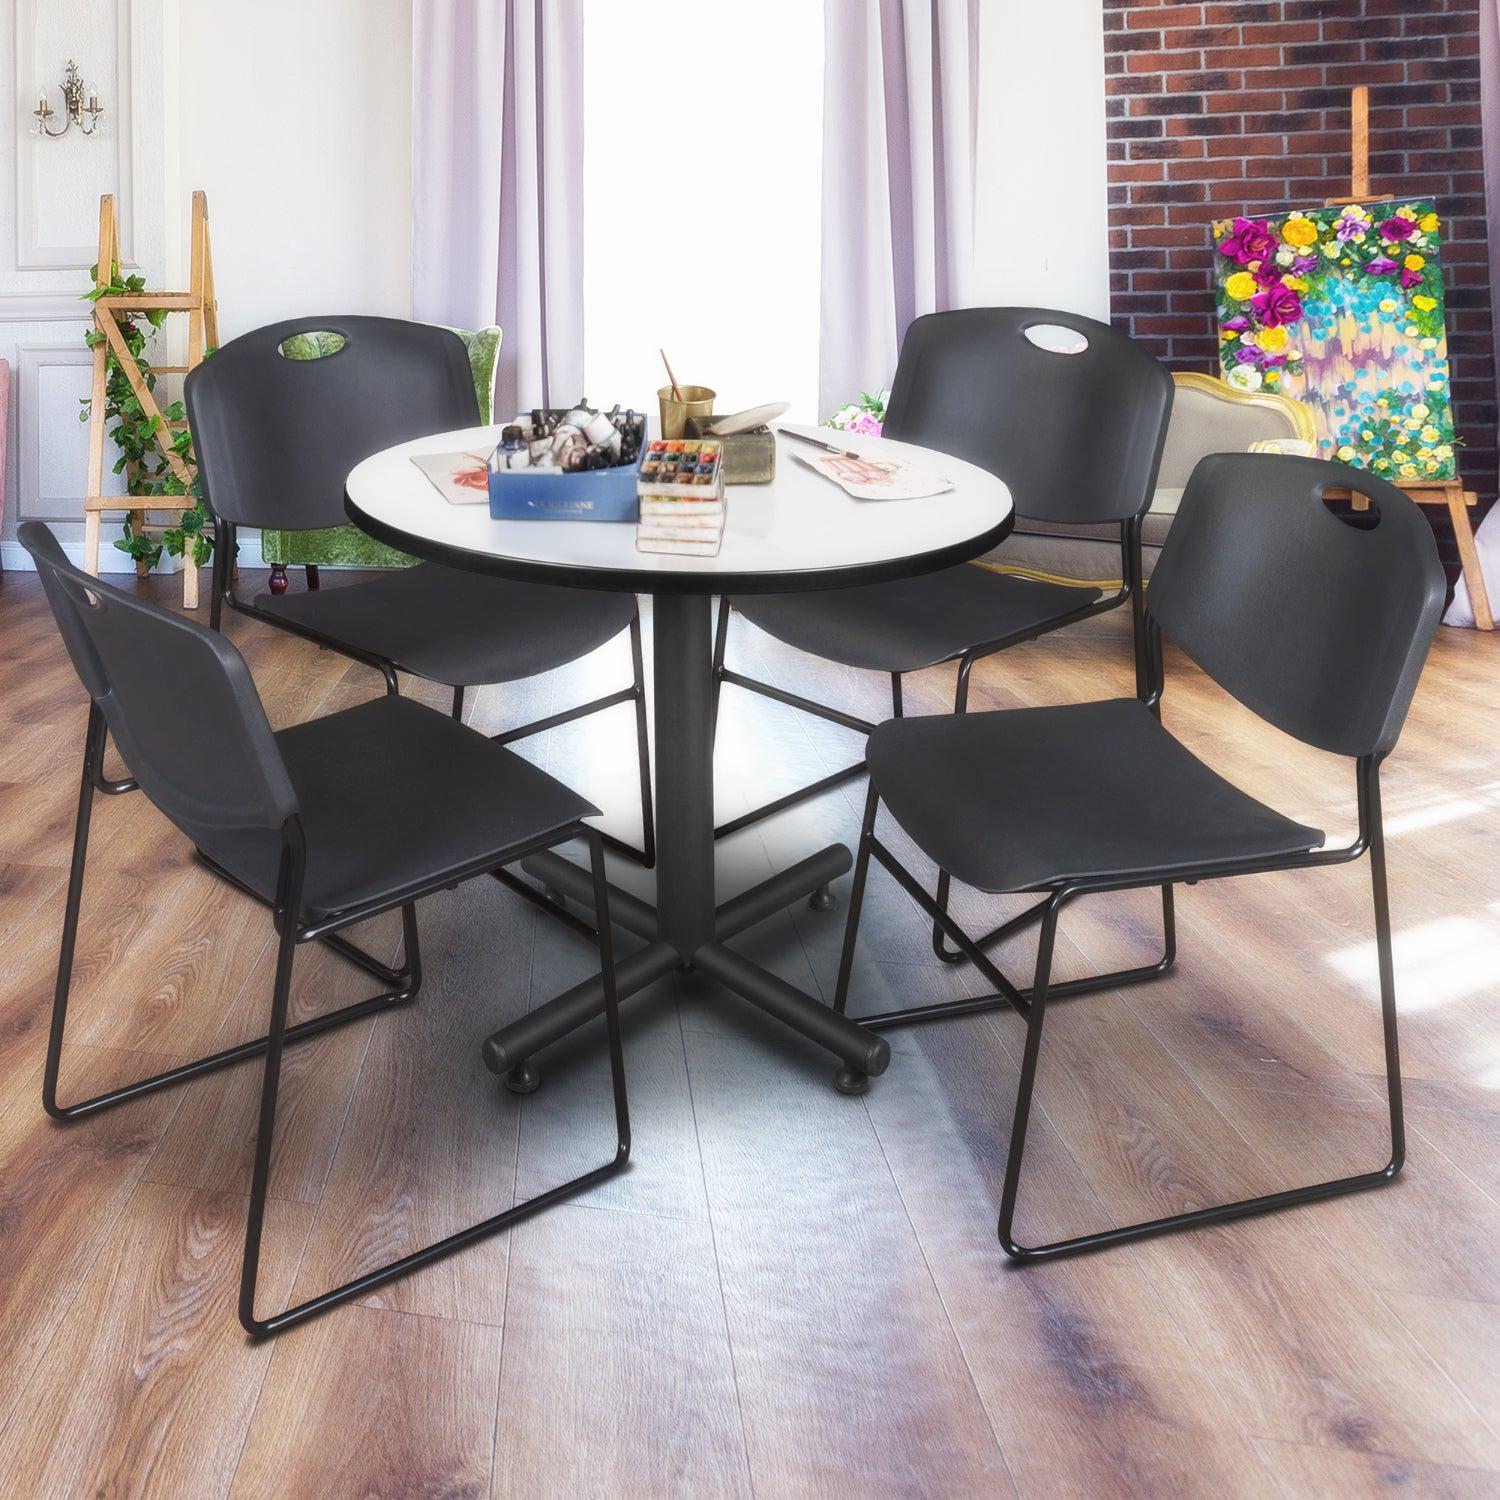 Kobe Round Breakroom Table and Chair Package, Kobe 36" Round X-Base Breakroom Table with 4 Zeng Stack Chairs